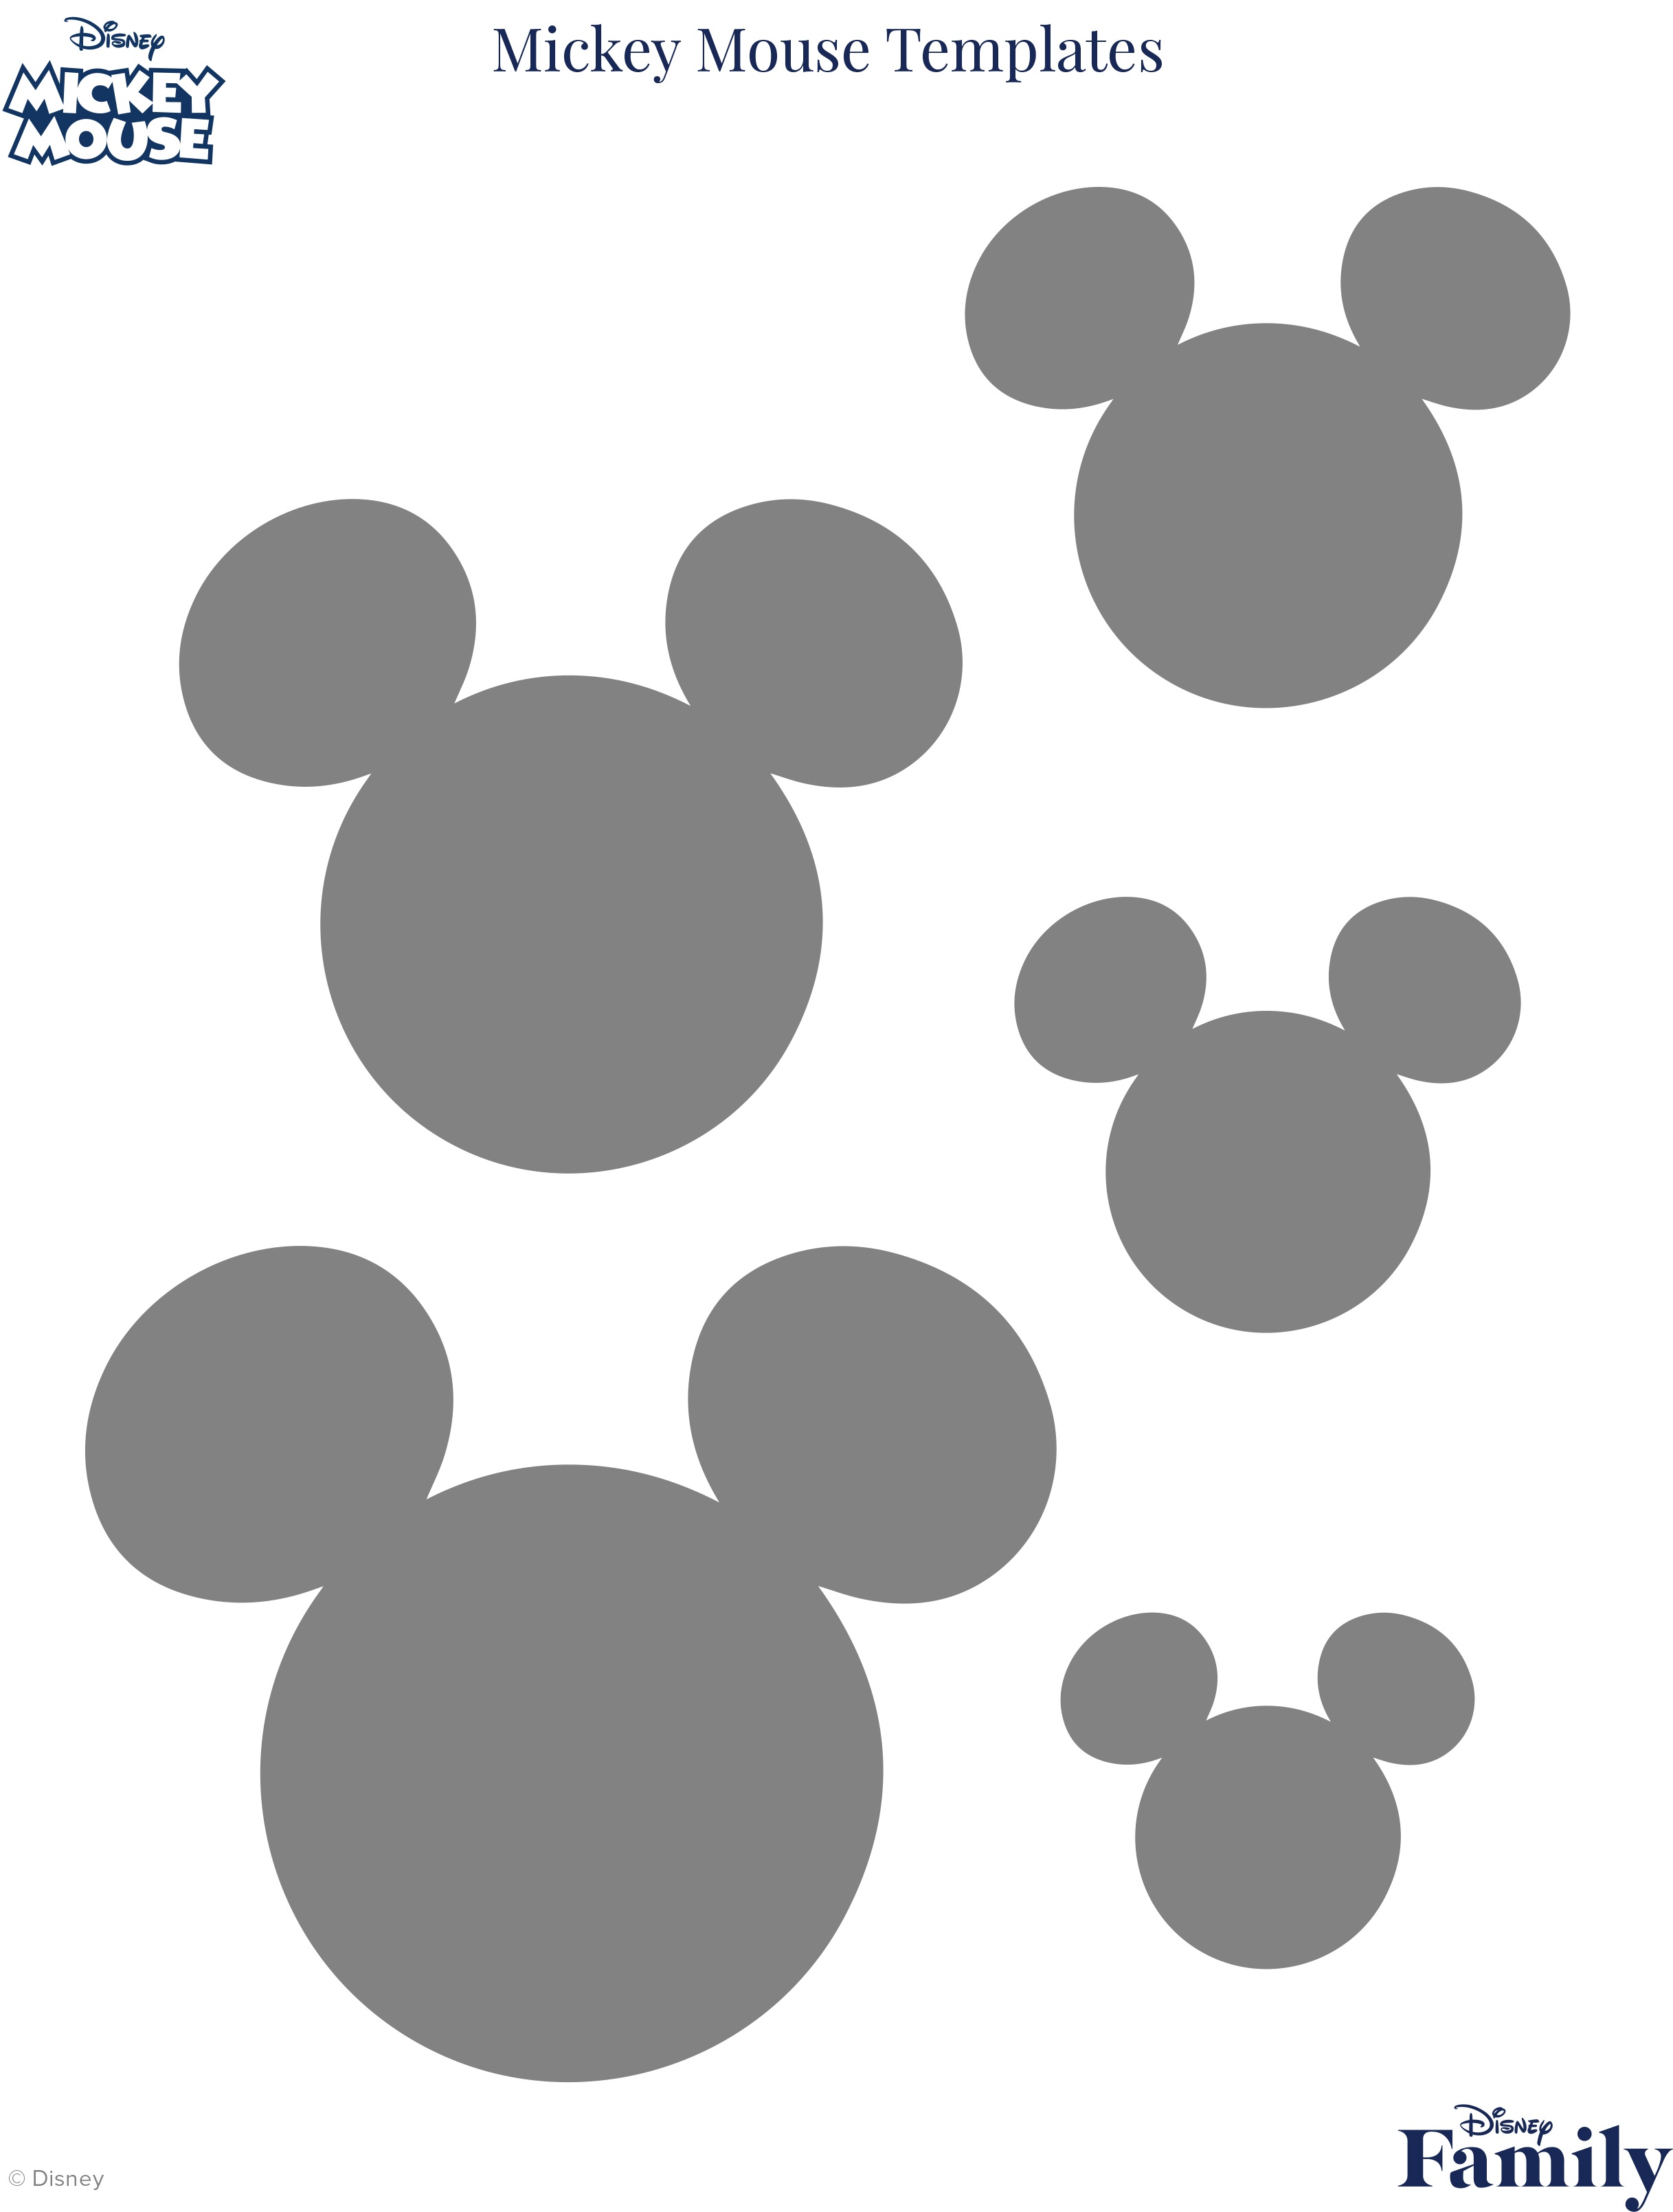 Mickey Mouse Template | Disney Family - Free Printable Mickey Mouse Template